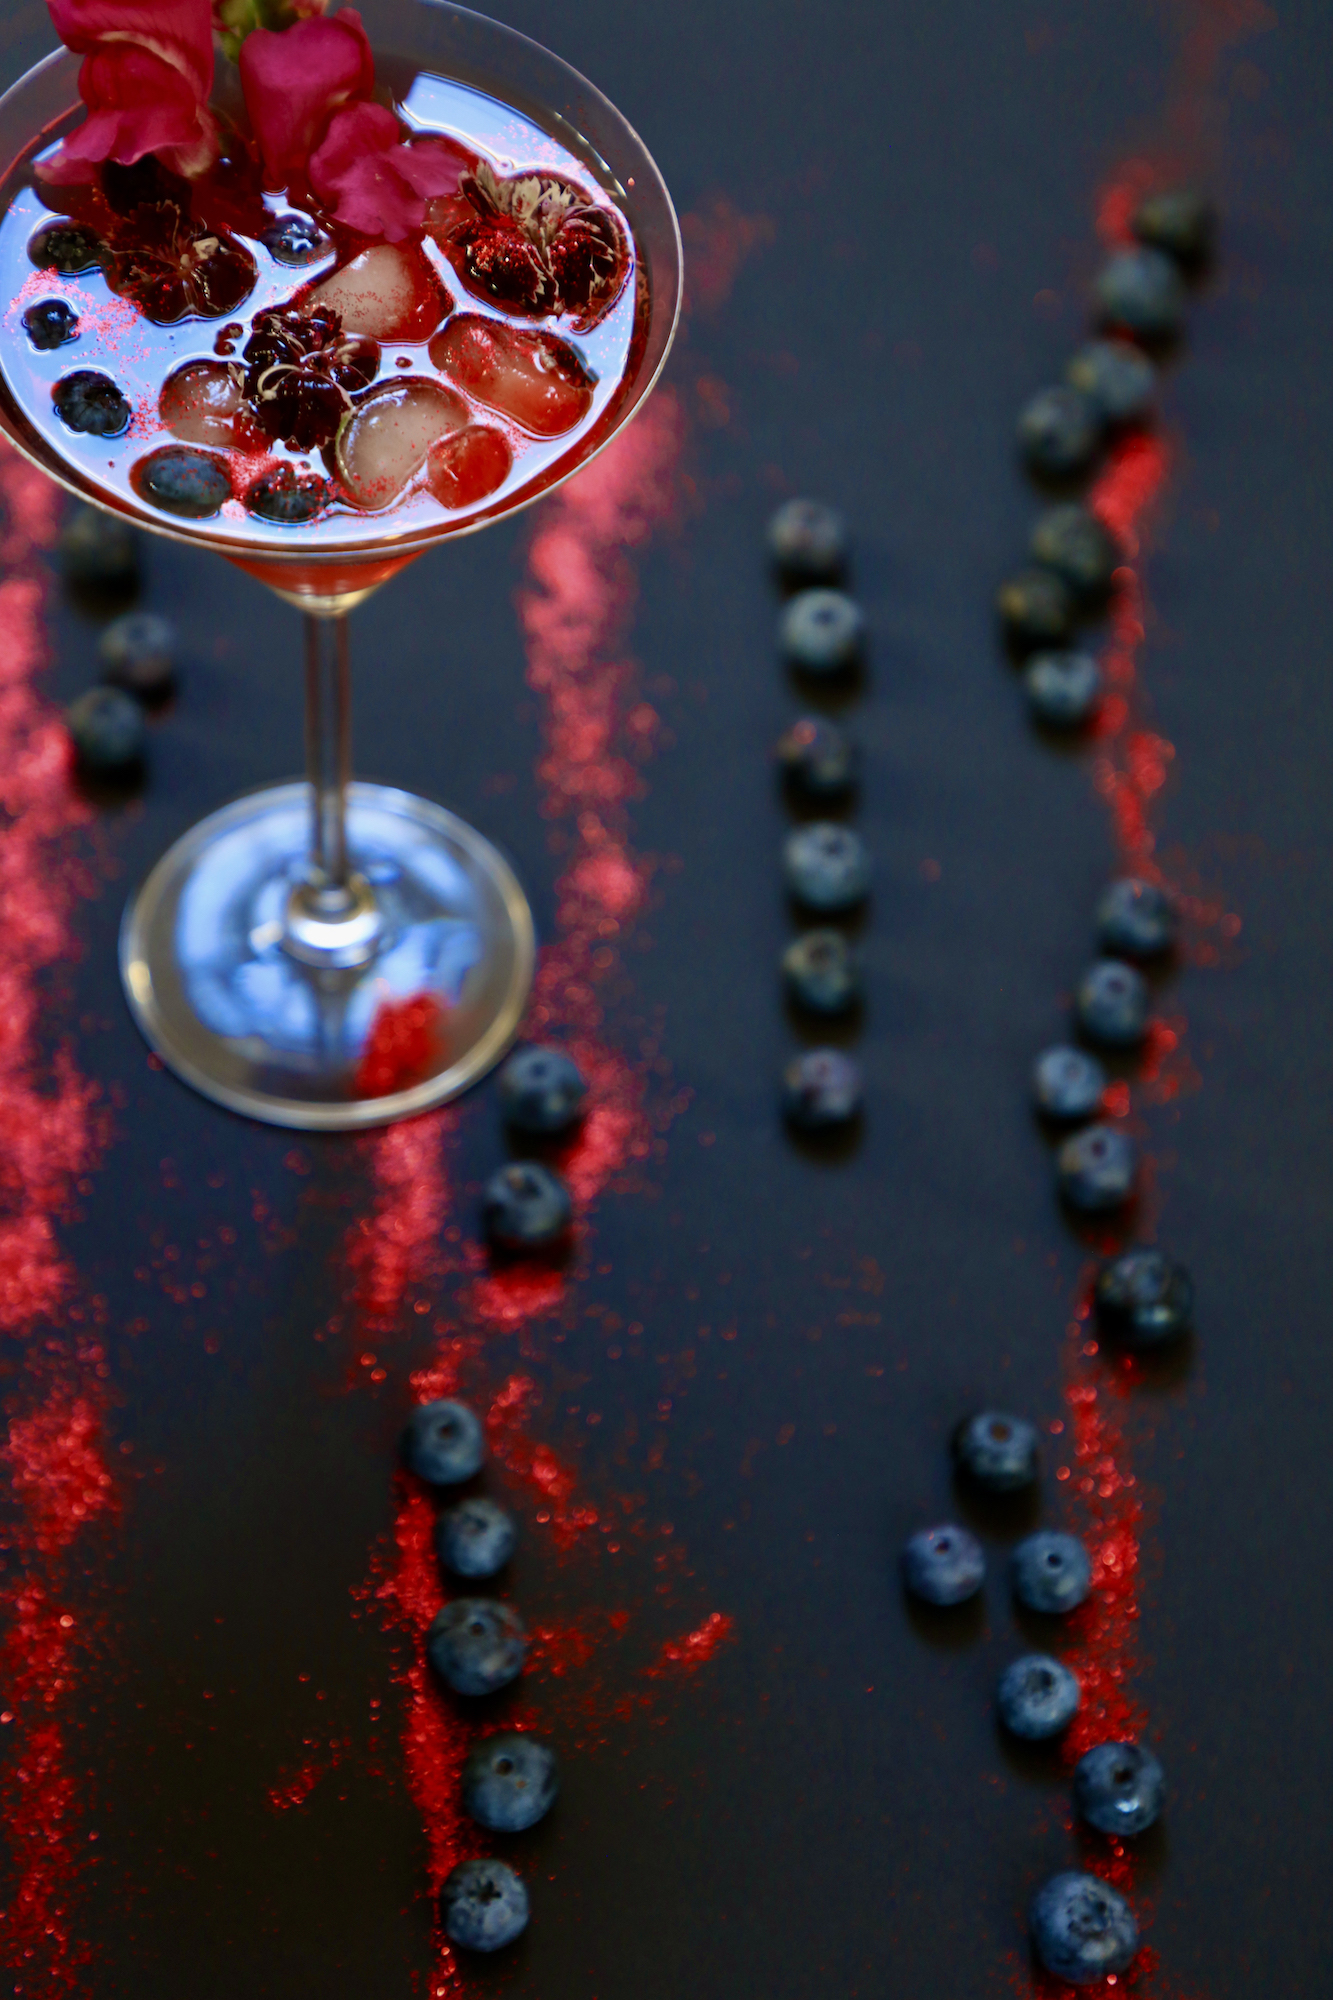 Snapdragon daiquiri with red glitter and blueberries 